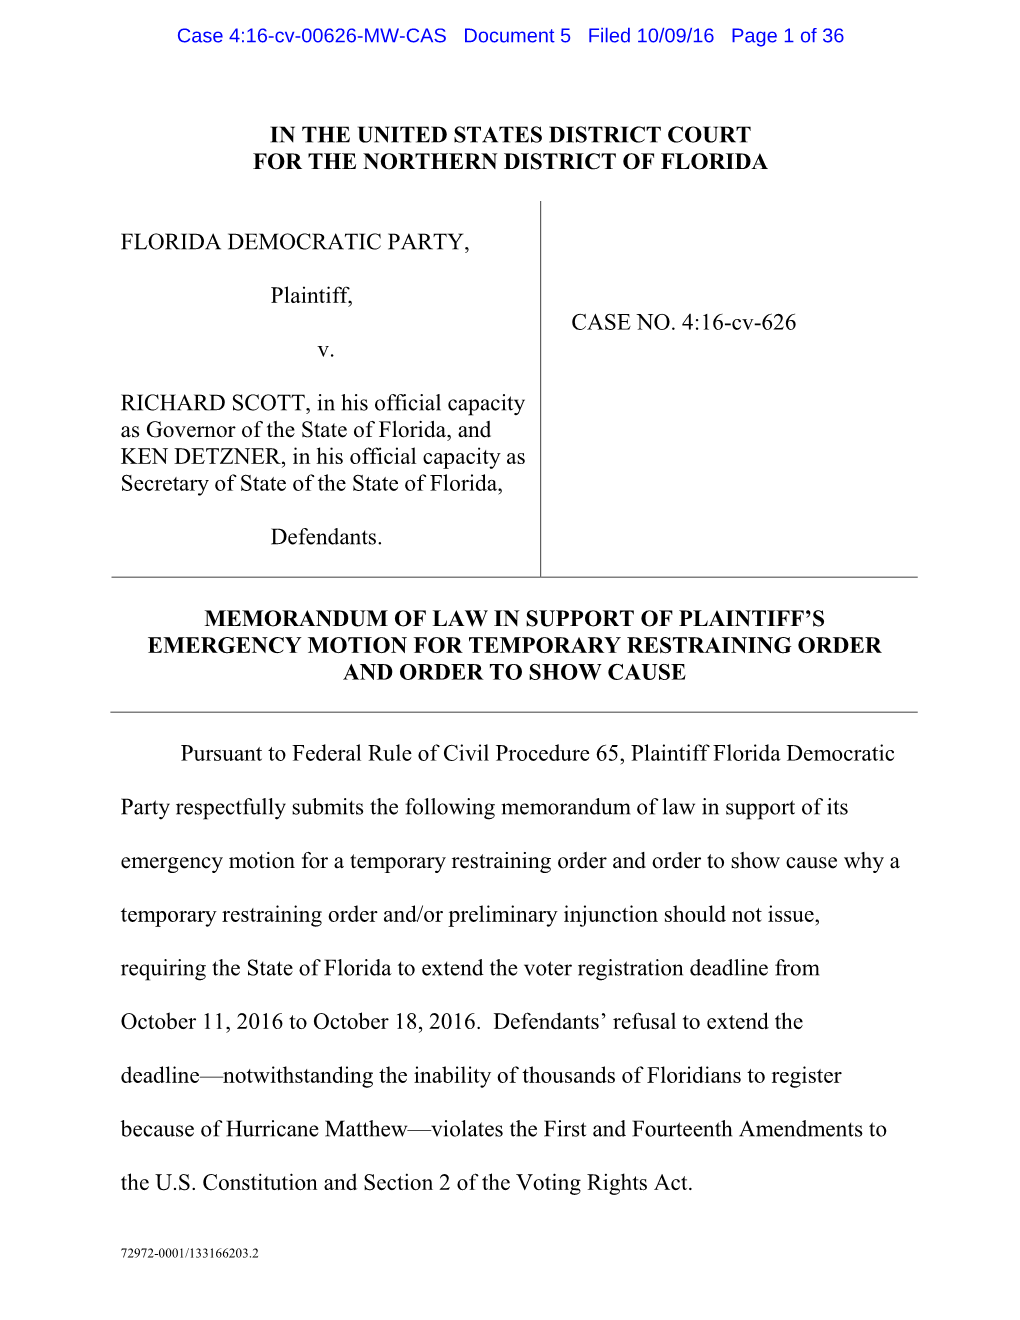 Memorandum of Law in Support of Plaintiff's Emergency Motion for Temporary Restraining Order and Order To